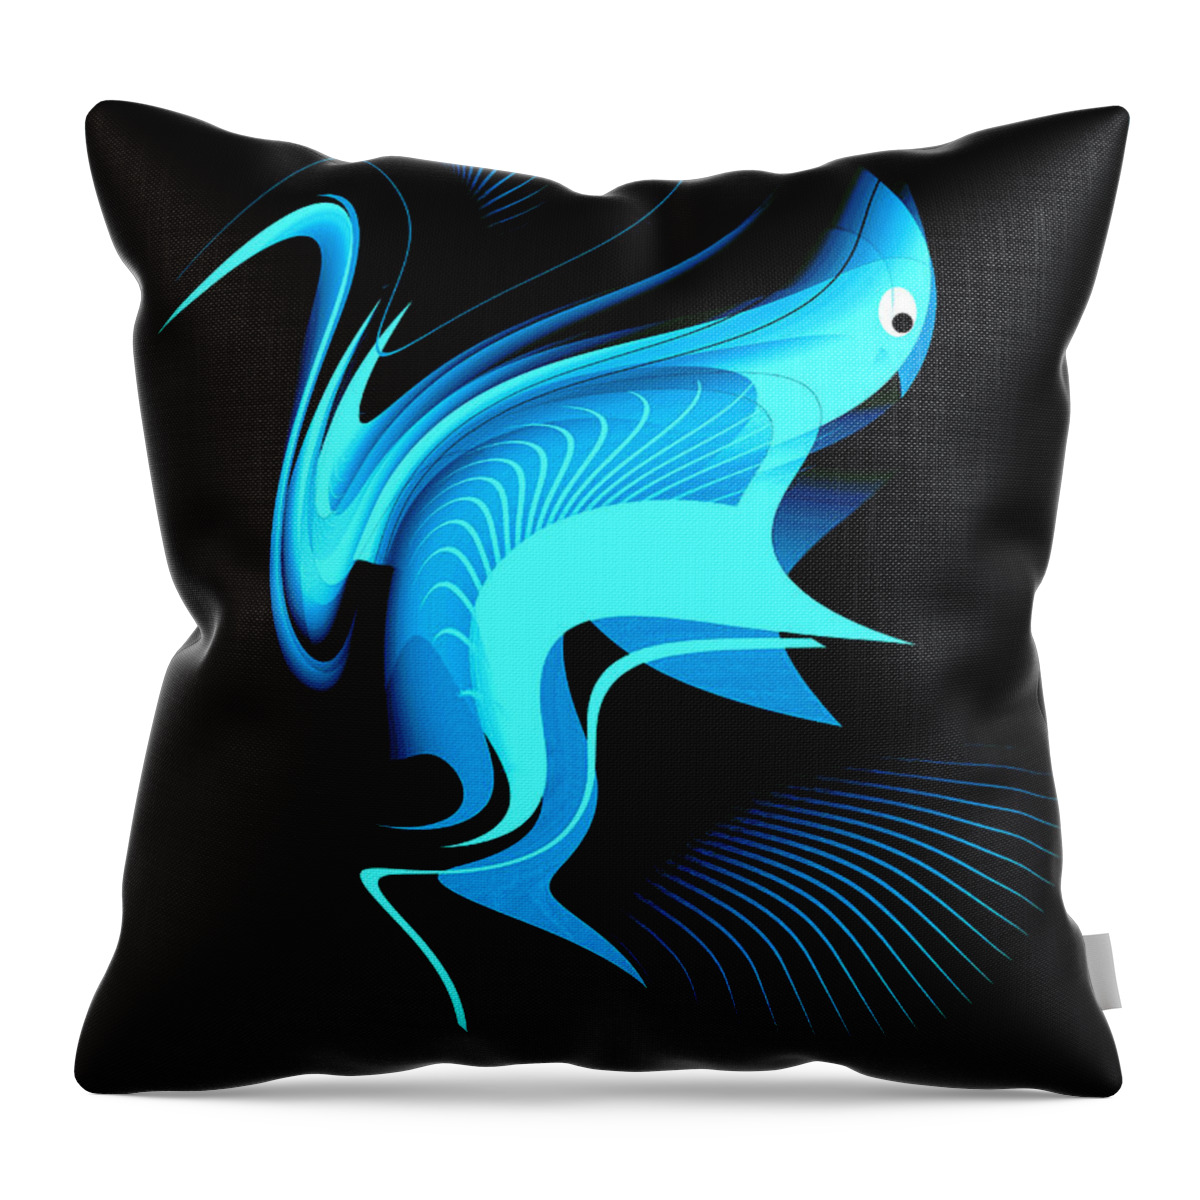 Abstract Throw Pillow featuring the digital art A Whossit by Iris Gelbart